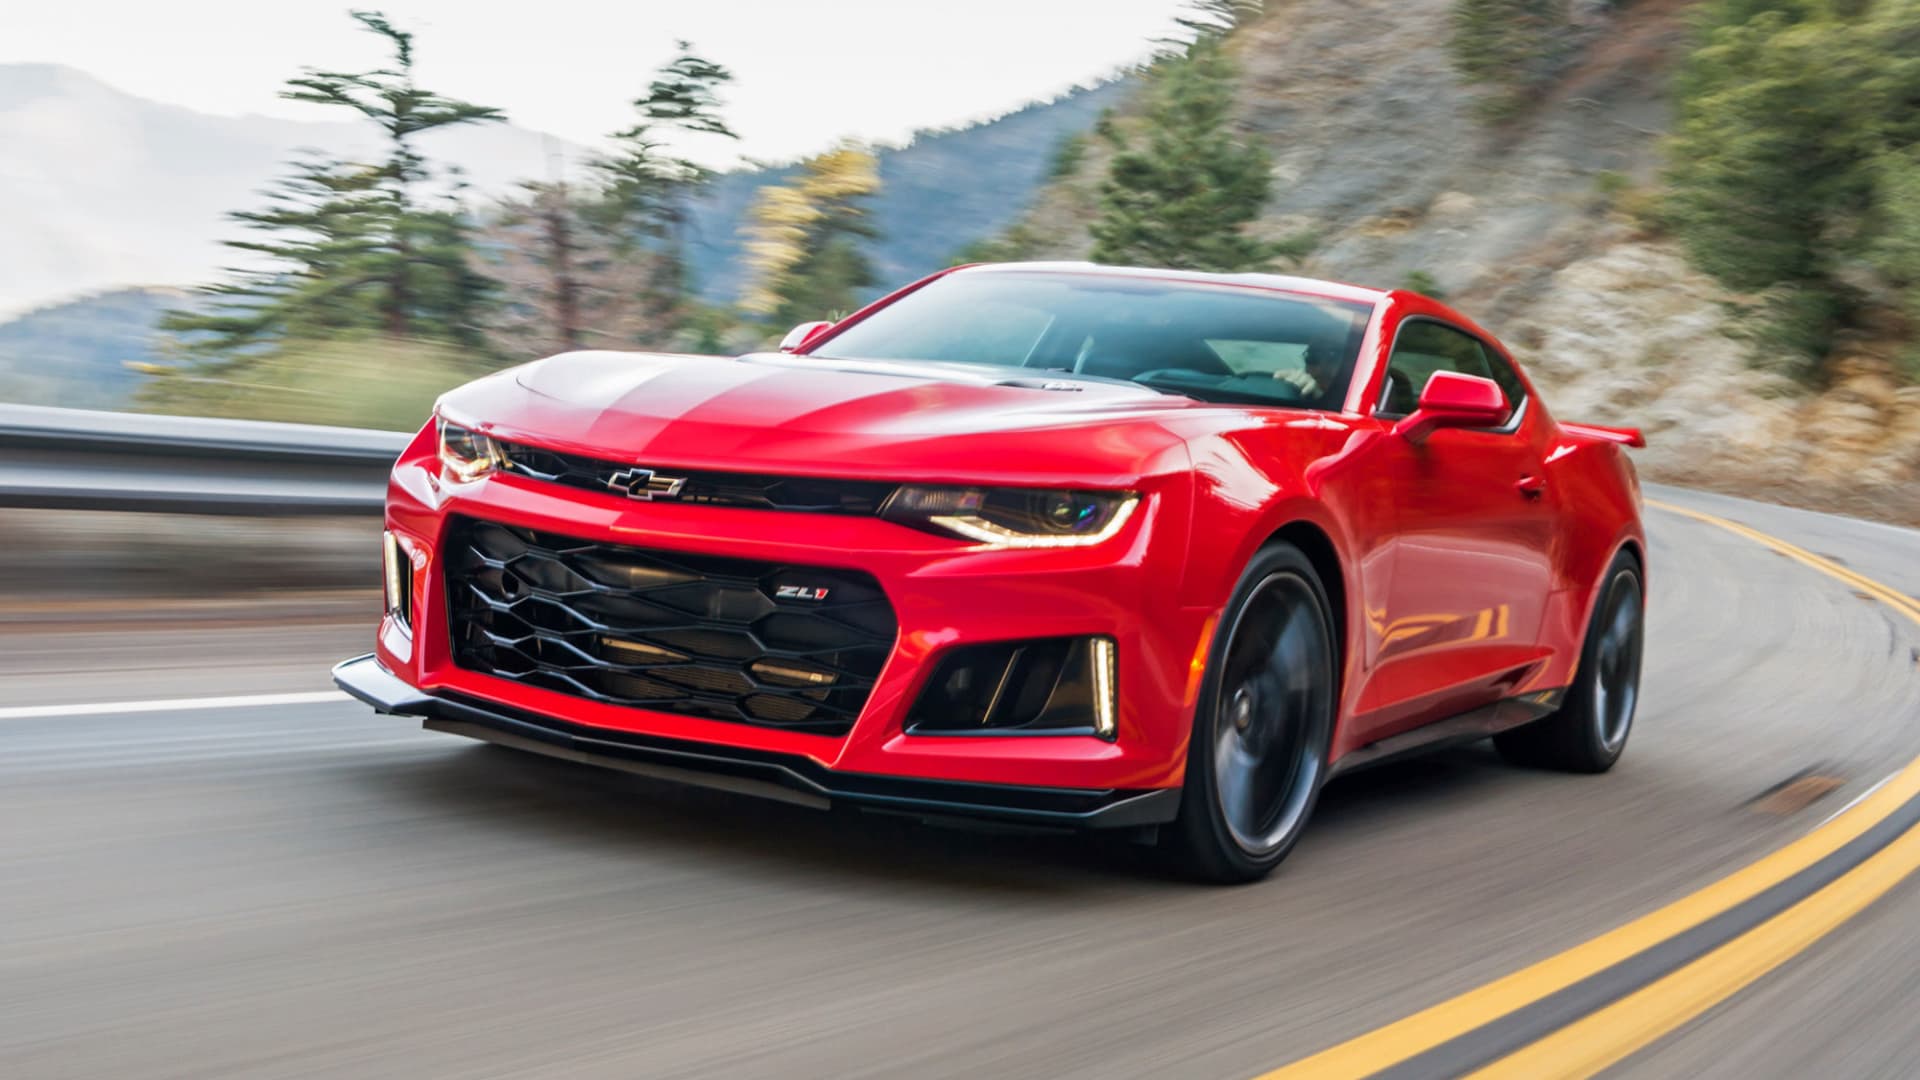 The Chevrolet Camaro ZL1 starts at about $62,000 and is powered by a 650-horsepower V8 engine, a considerable upgrade over the roughly $26,000 base model.